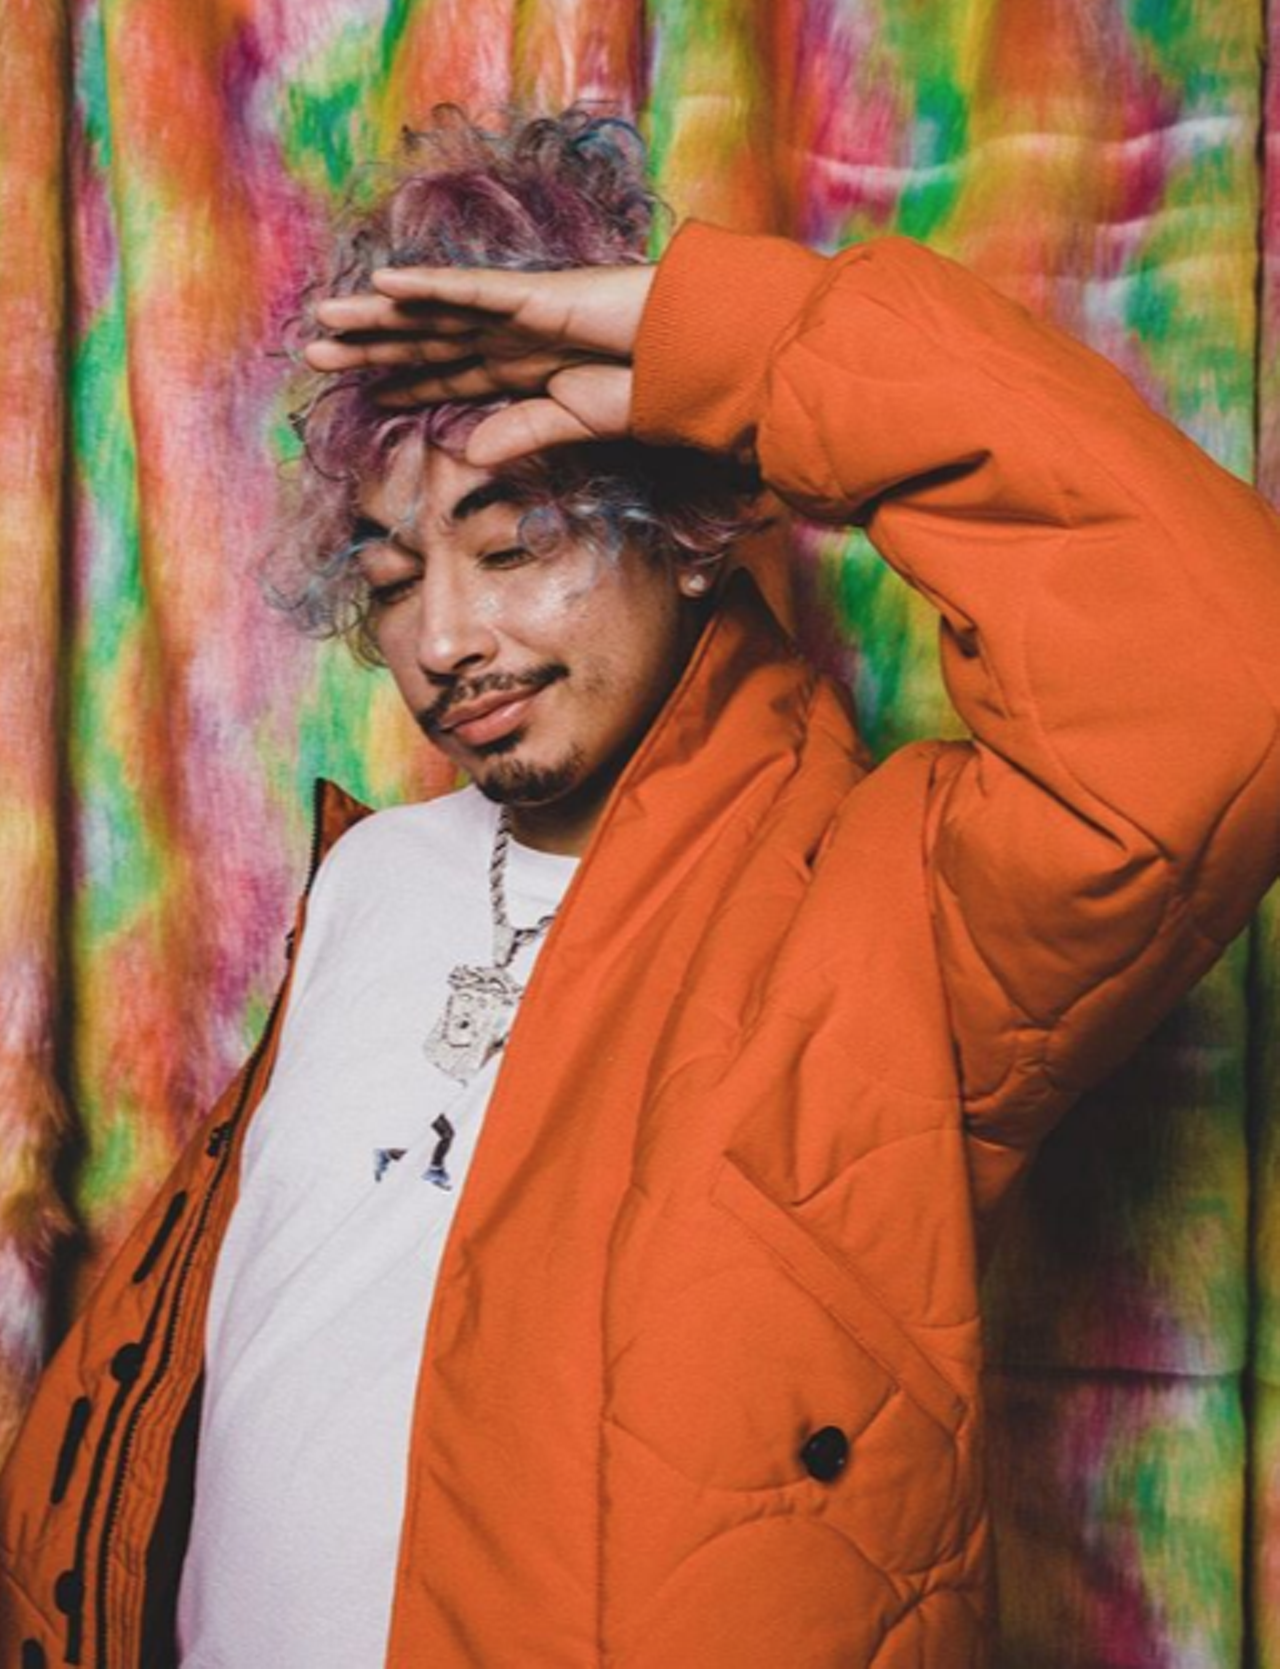 Lil Booty Call has a baby trap vibe. In other words, he performs mumble rap minus the tough-guy lyrical themes we’ve come to expect. In fact, his delivery is almost kid-like. And while the rapper himself is cute and youthful, he’s made enough noise to sell out venues in LA just on the strength of his Soundcloud releases. That’s some real DIY clout if we say so ourselves.
Photo via Instagram / lilbootycall